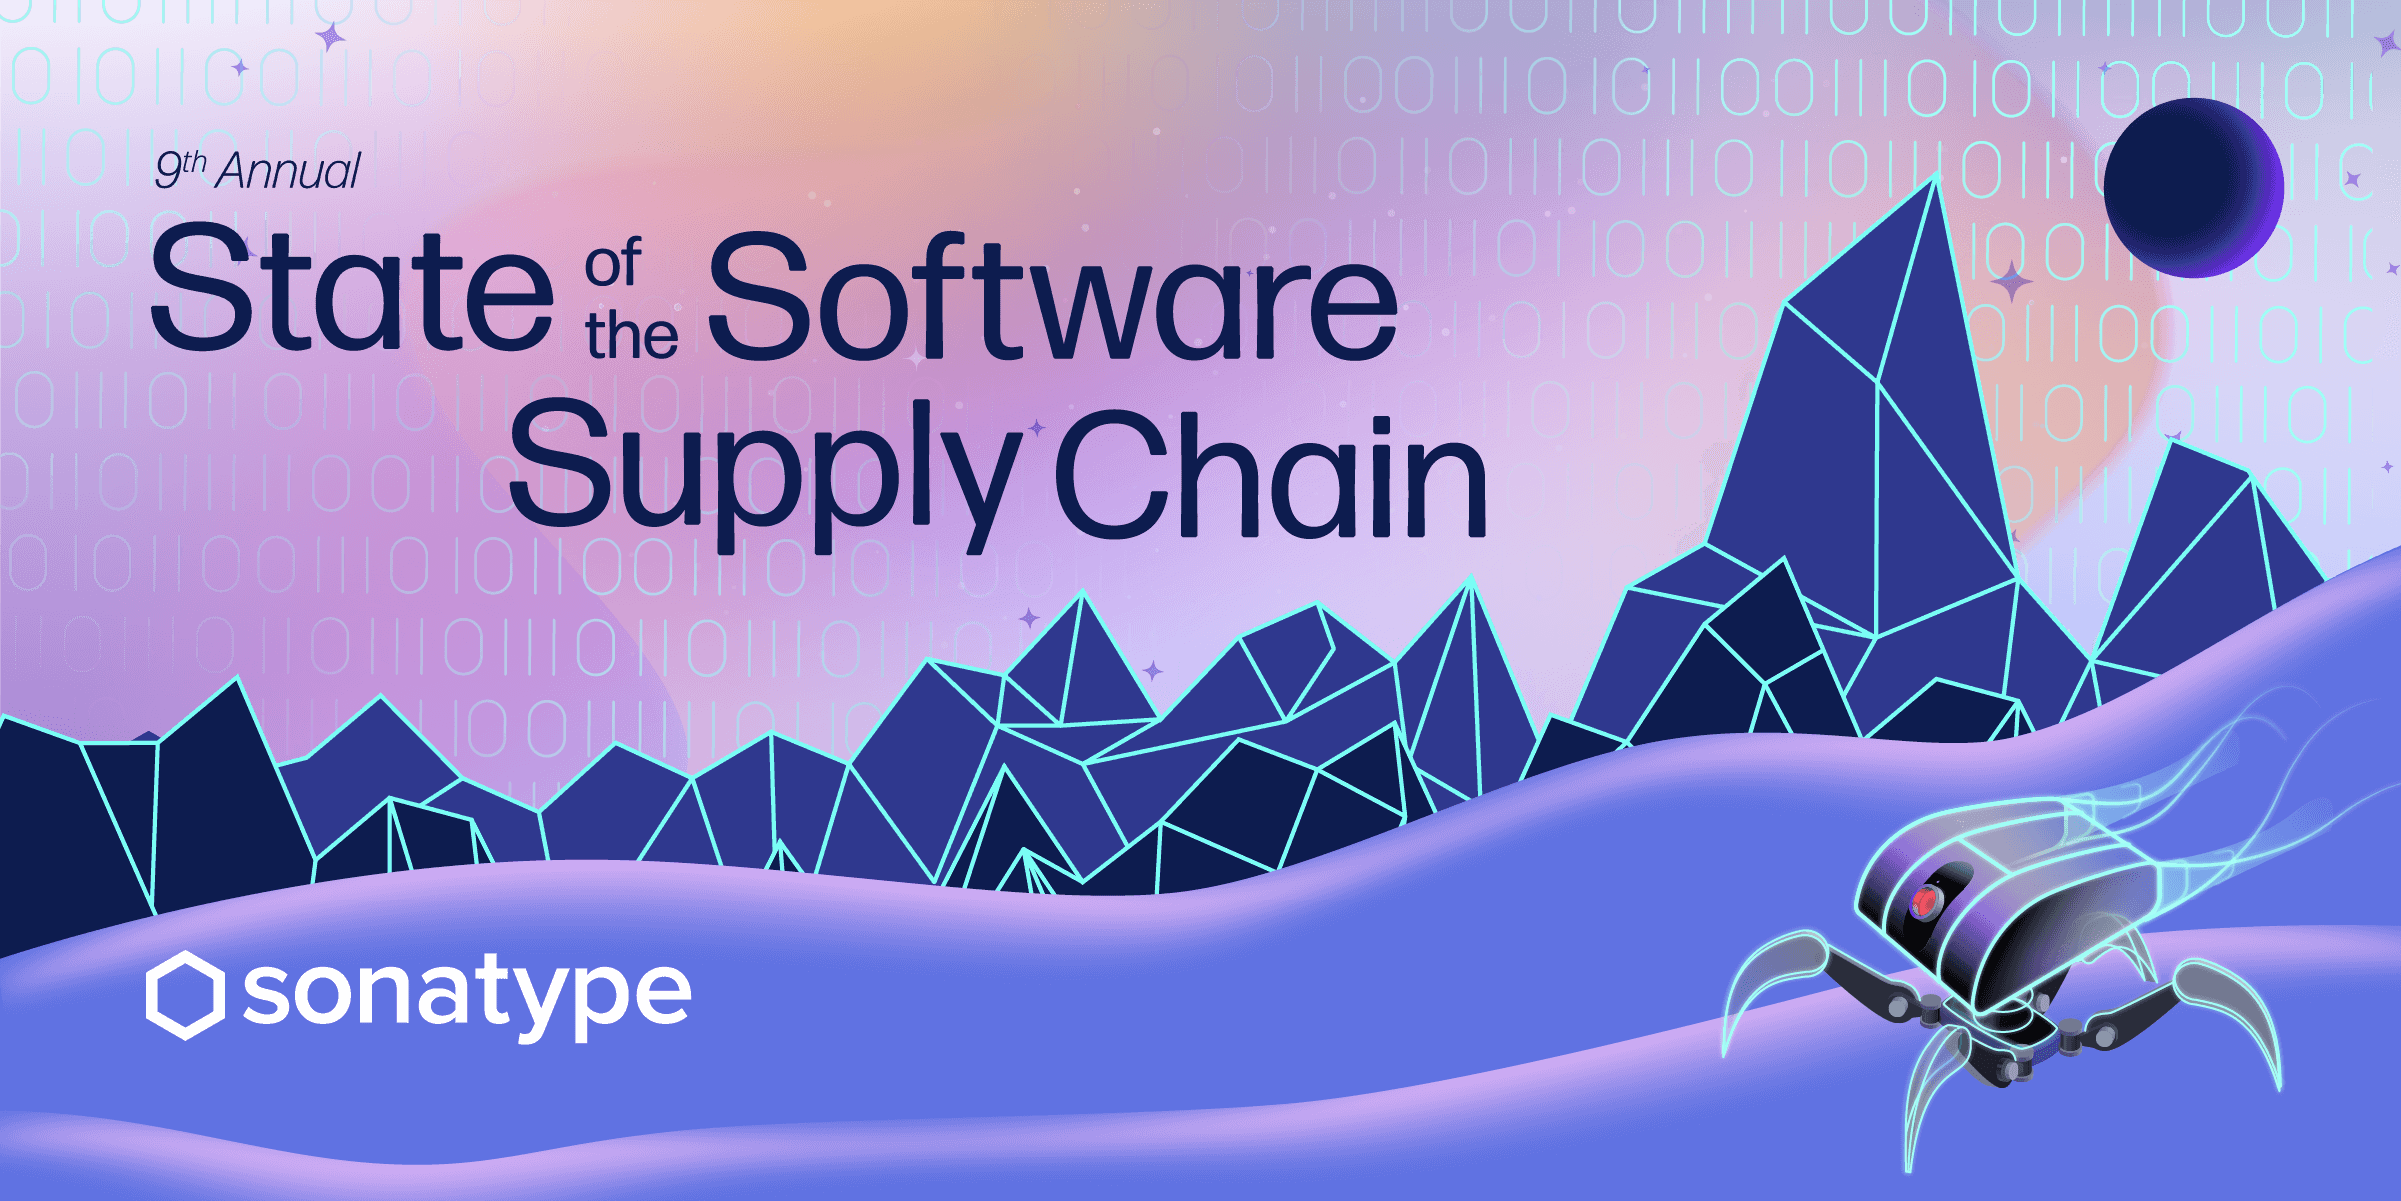 Introducing our 9th annual State of the Software Supply Chain report